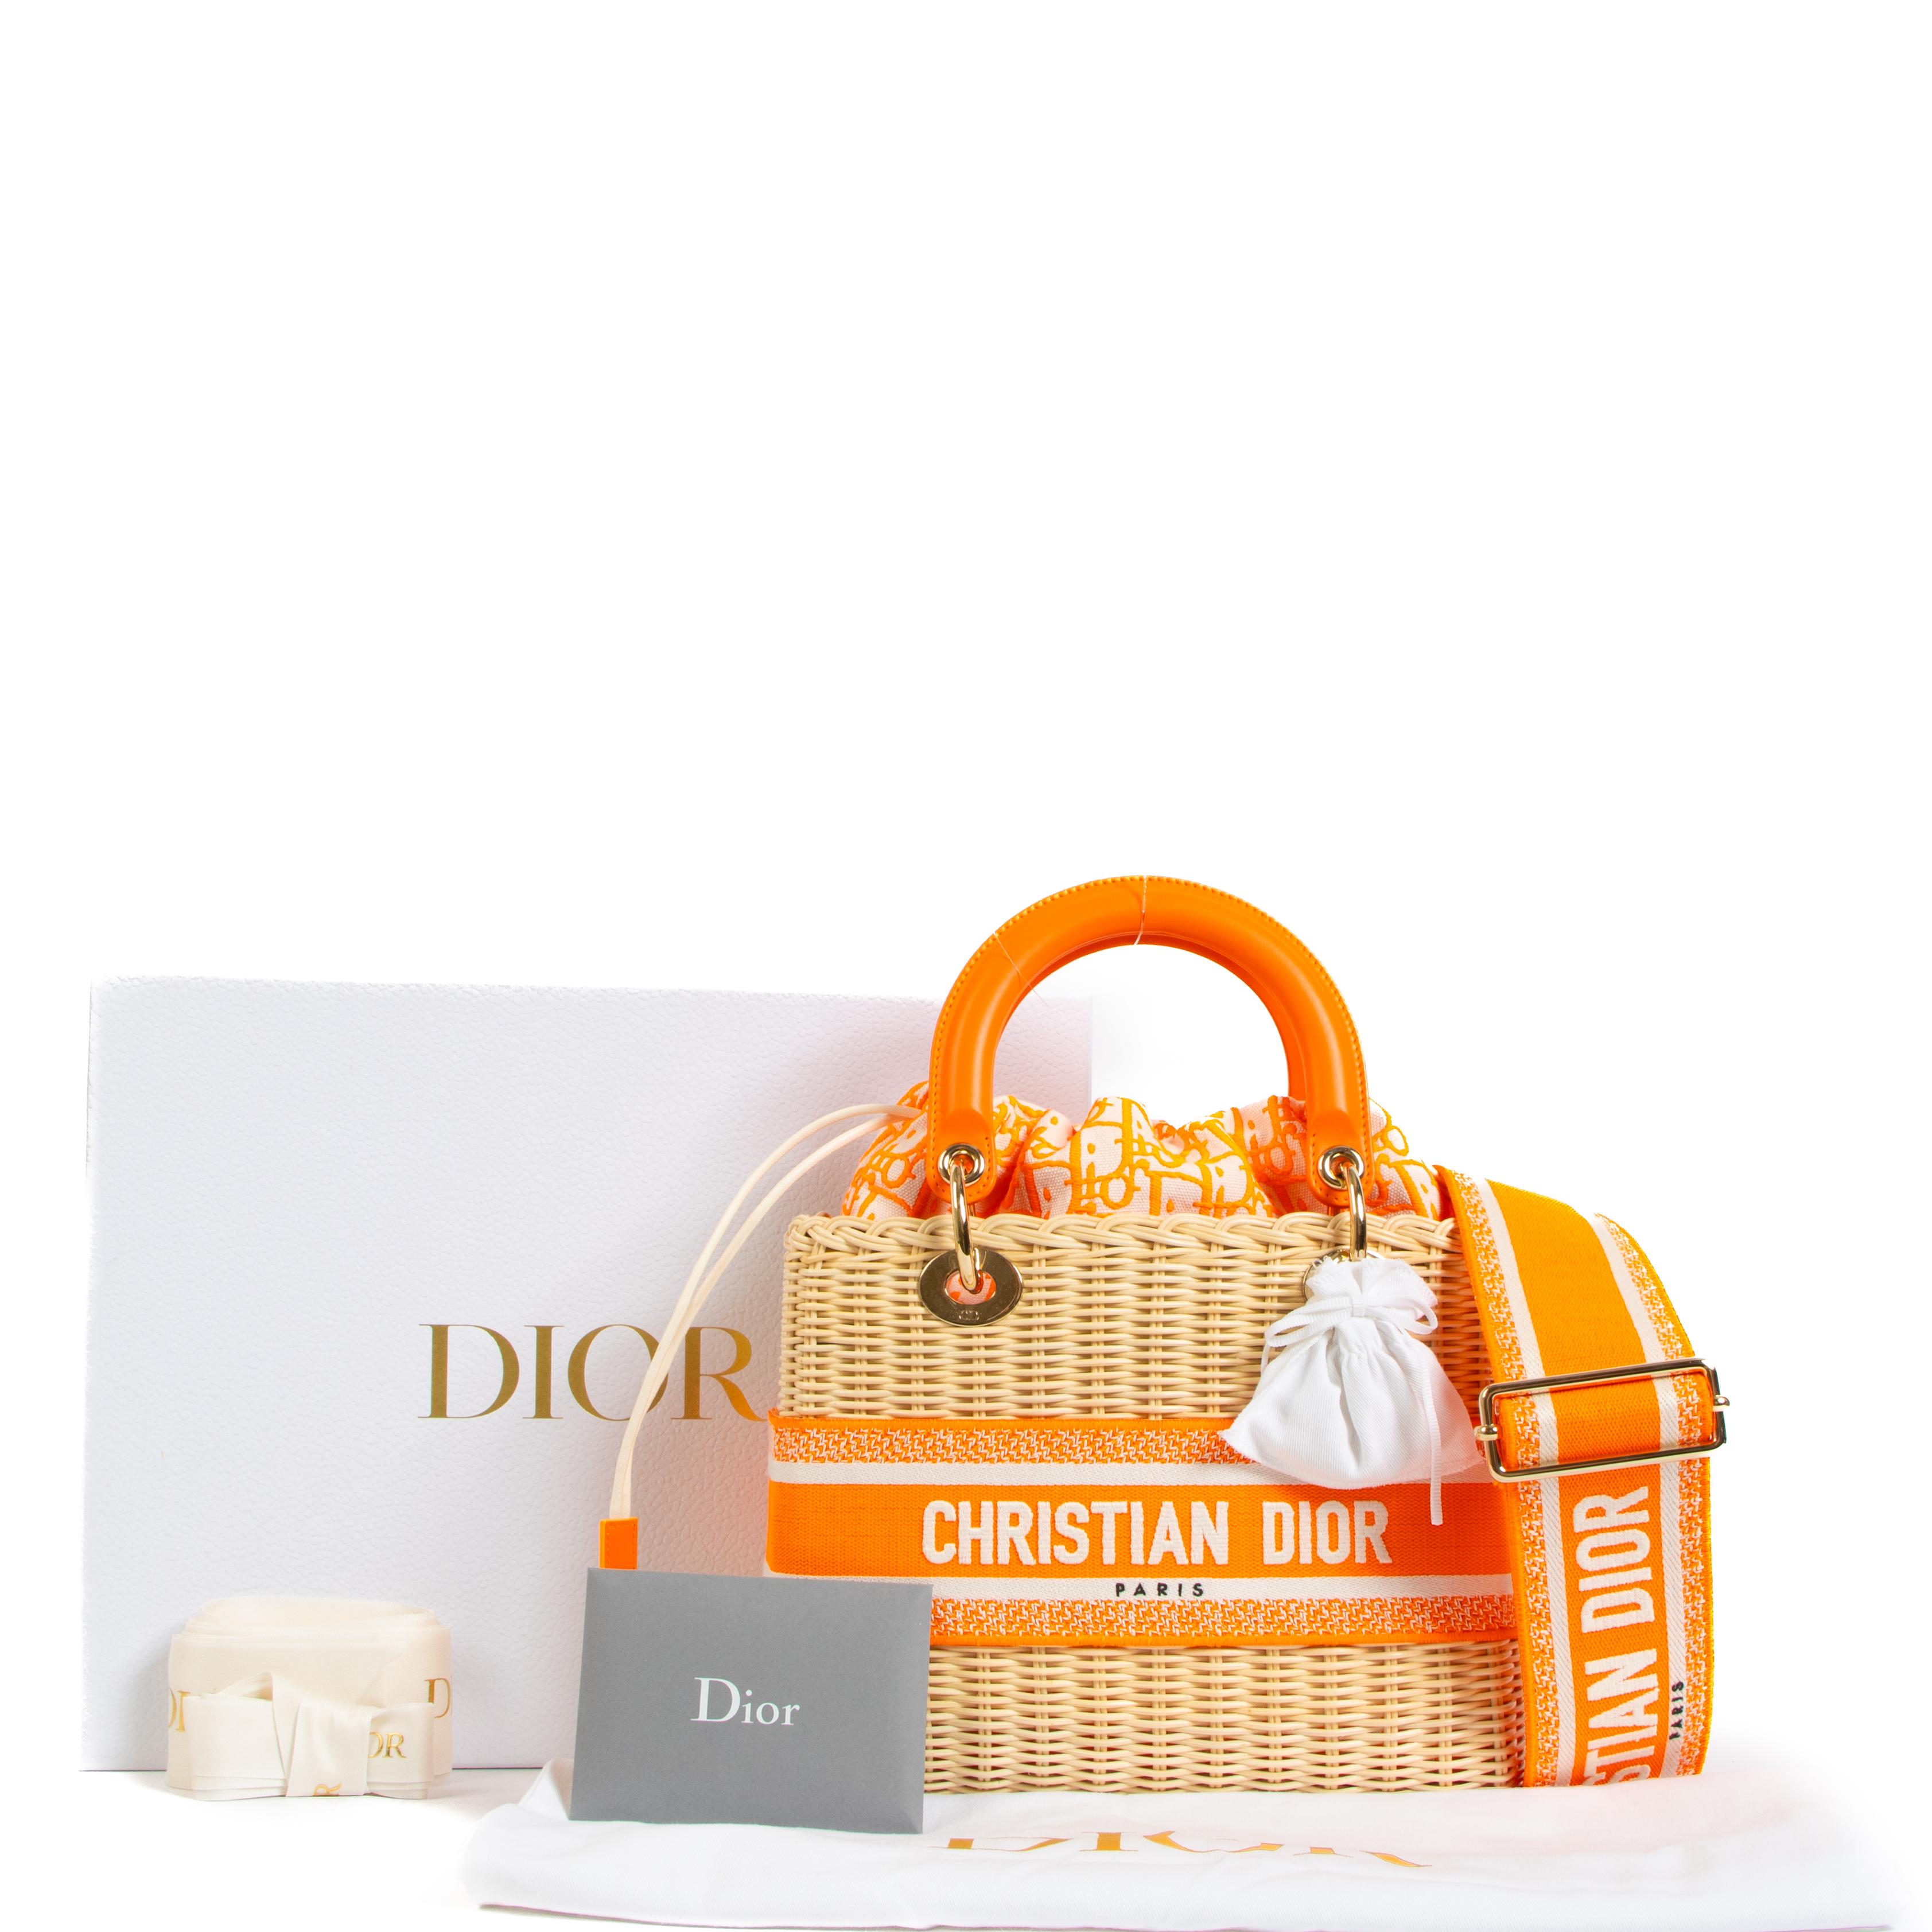 Are you still looking for the perfect summer bag? We've found it! 

This Dior Lady Dior bag is crafted from wicker and features neon orange details. It is a bag that can be worn to many occasions, like the beach or a fancy dinner. This bag elevates